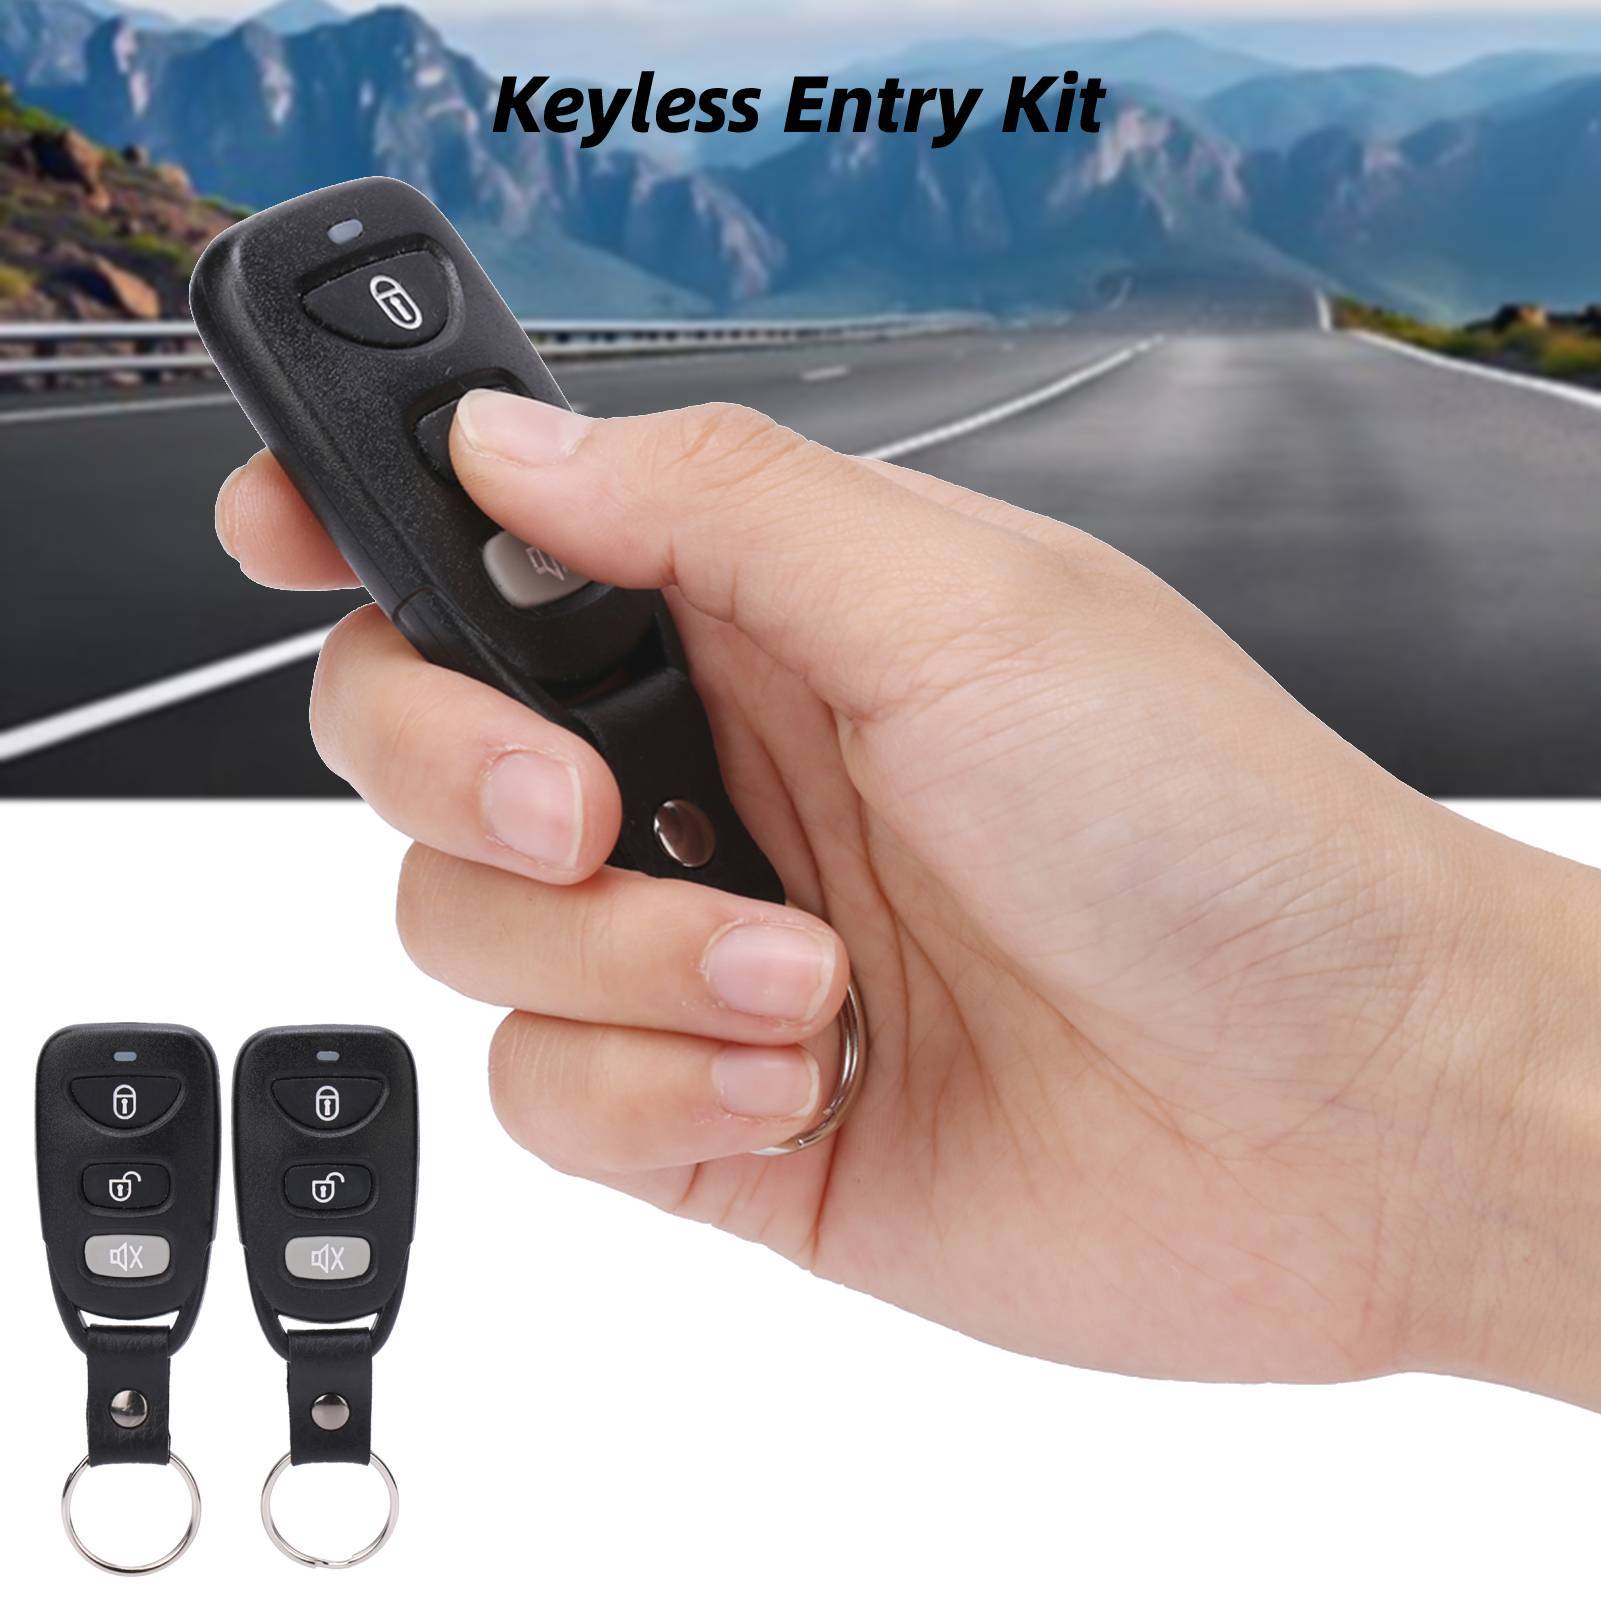 

Keyless Entry System, Universal Car Door Lock And Unlock System Remote Control Auto Vehicle Central Locking Security Keyless Entry Kit With And 4 Door Lock Actuators